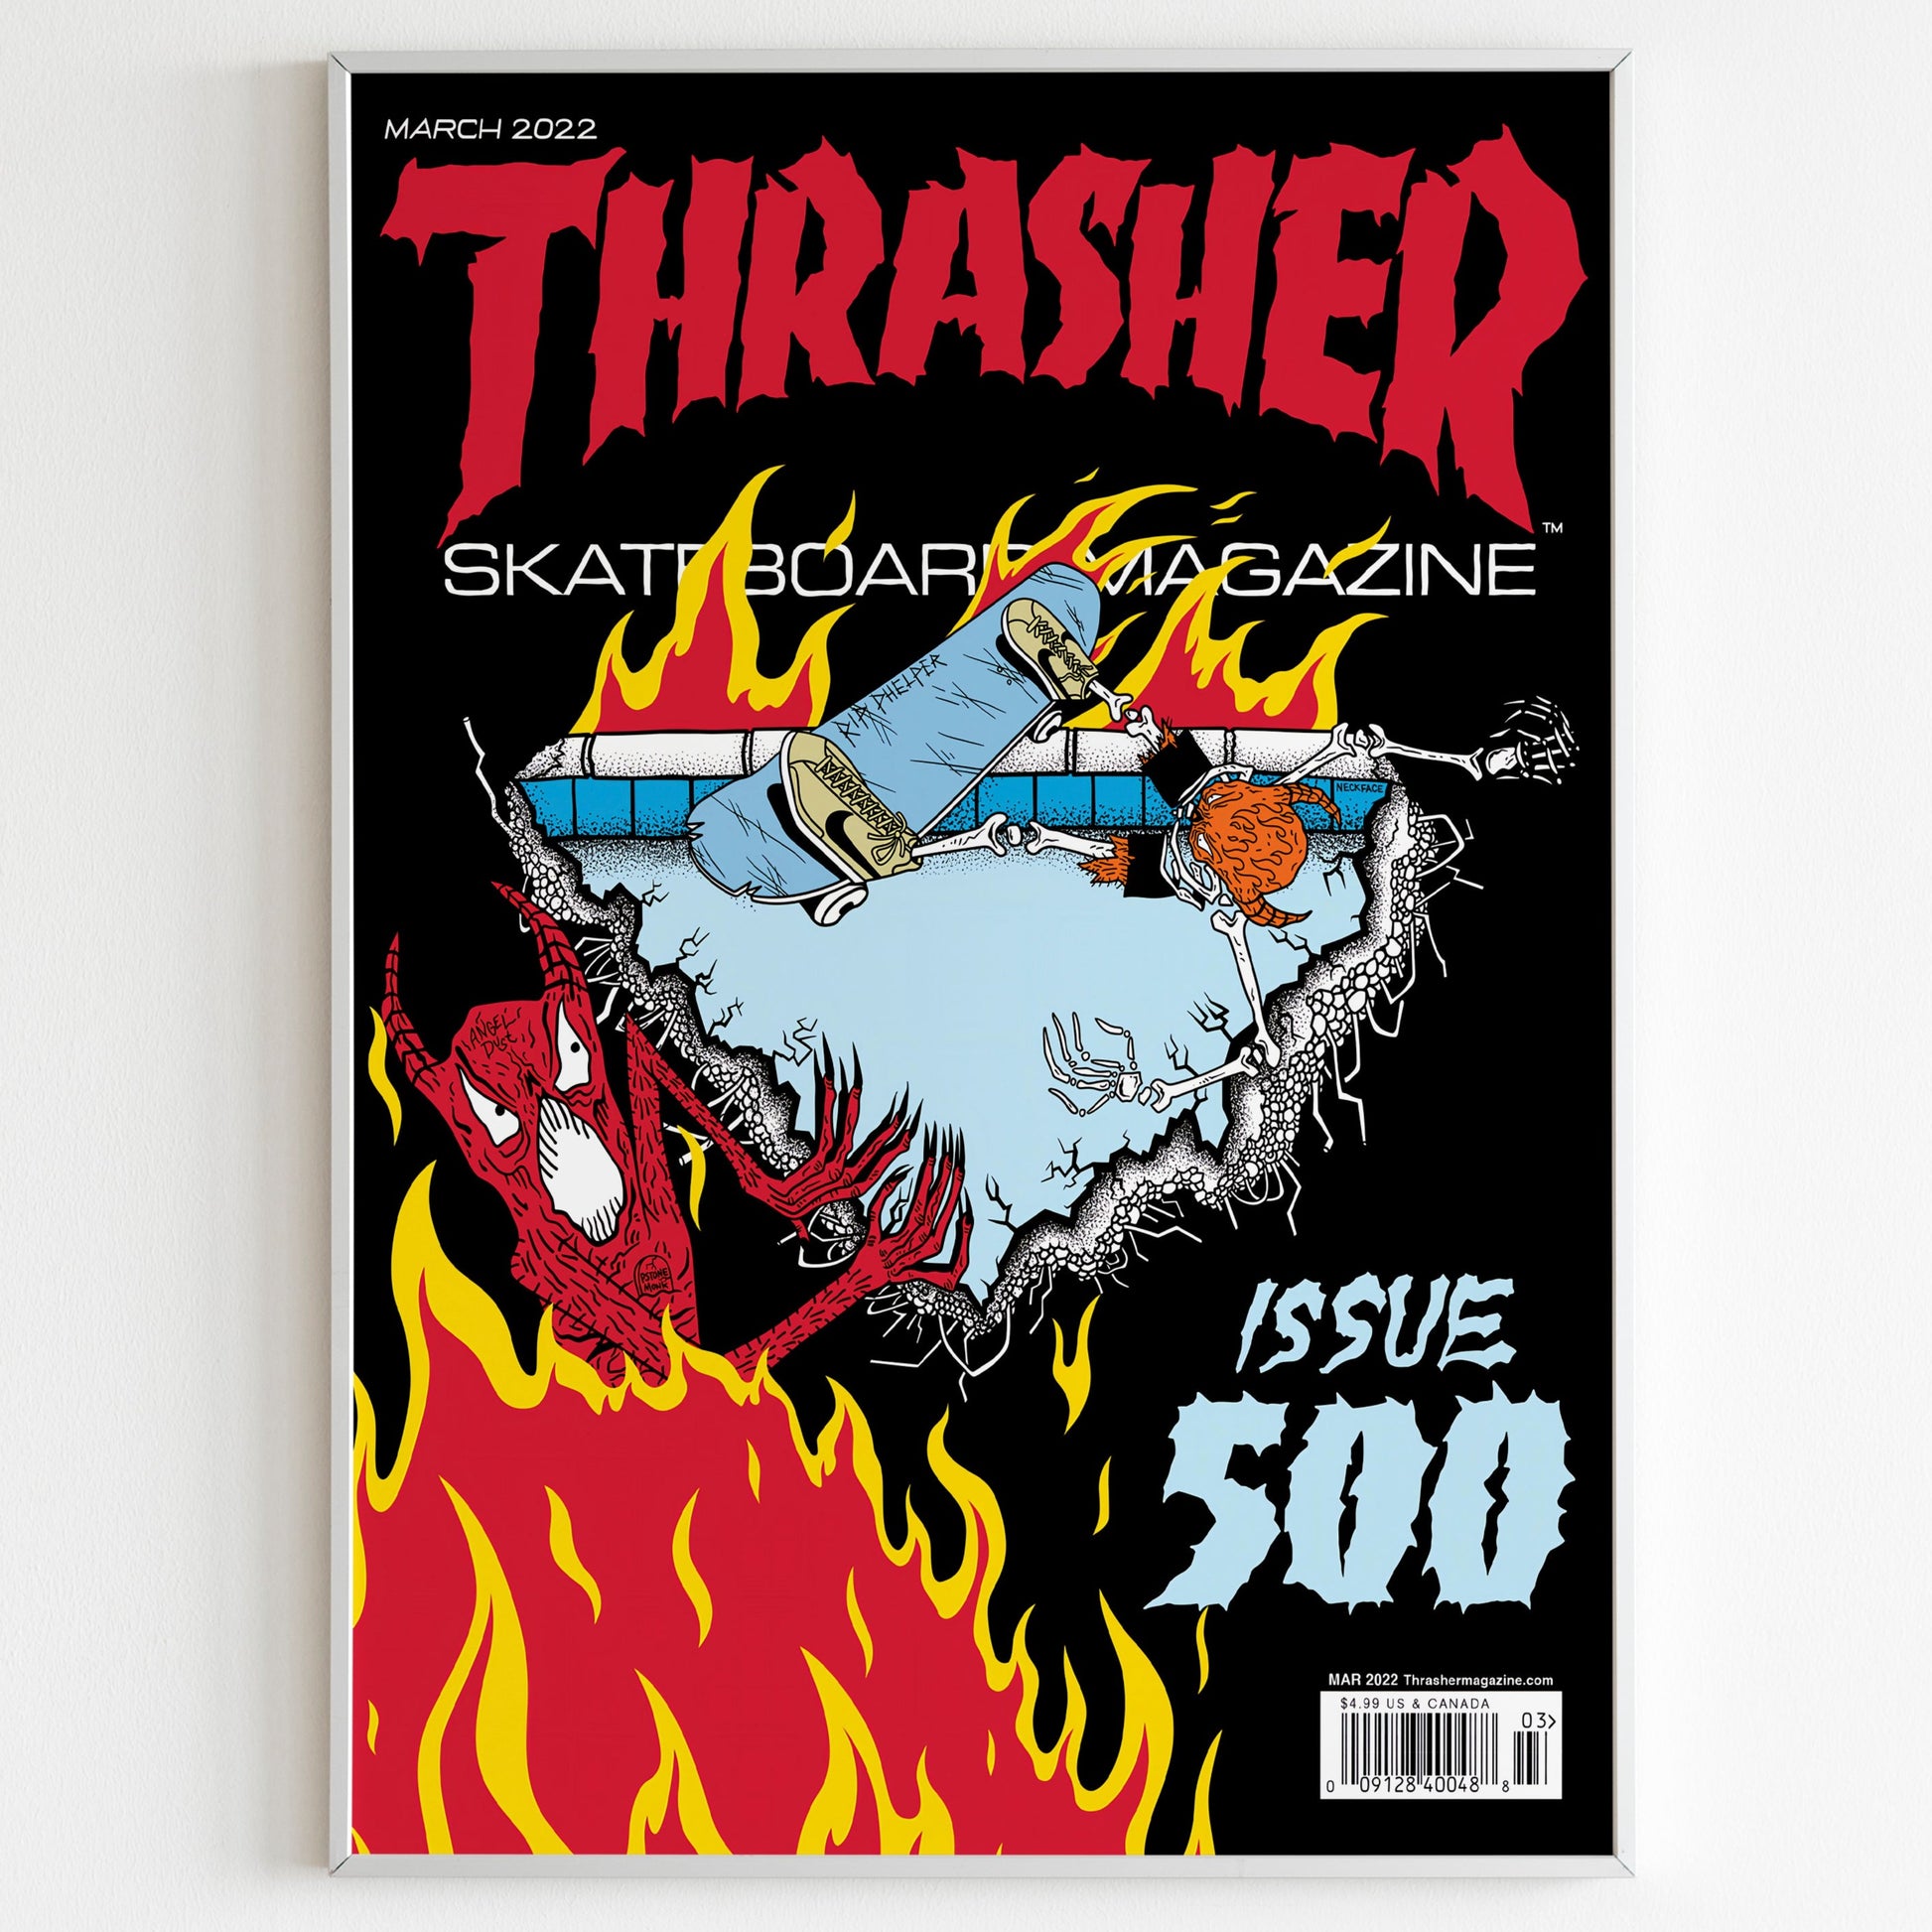 Thrasher Skateboarding Front Cover March 2022 500 Issue Advertising Poster, Skateboarding Style 80s Print, Vintage Front Cover Ad Wall Art, 90s Skate Poster, Magazine Retro Advertisement